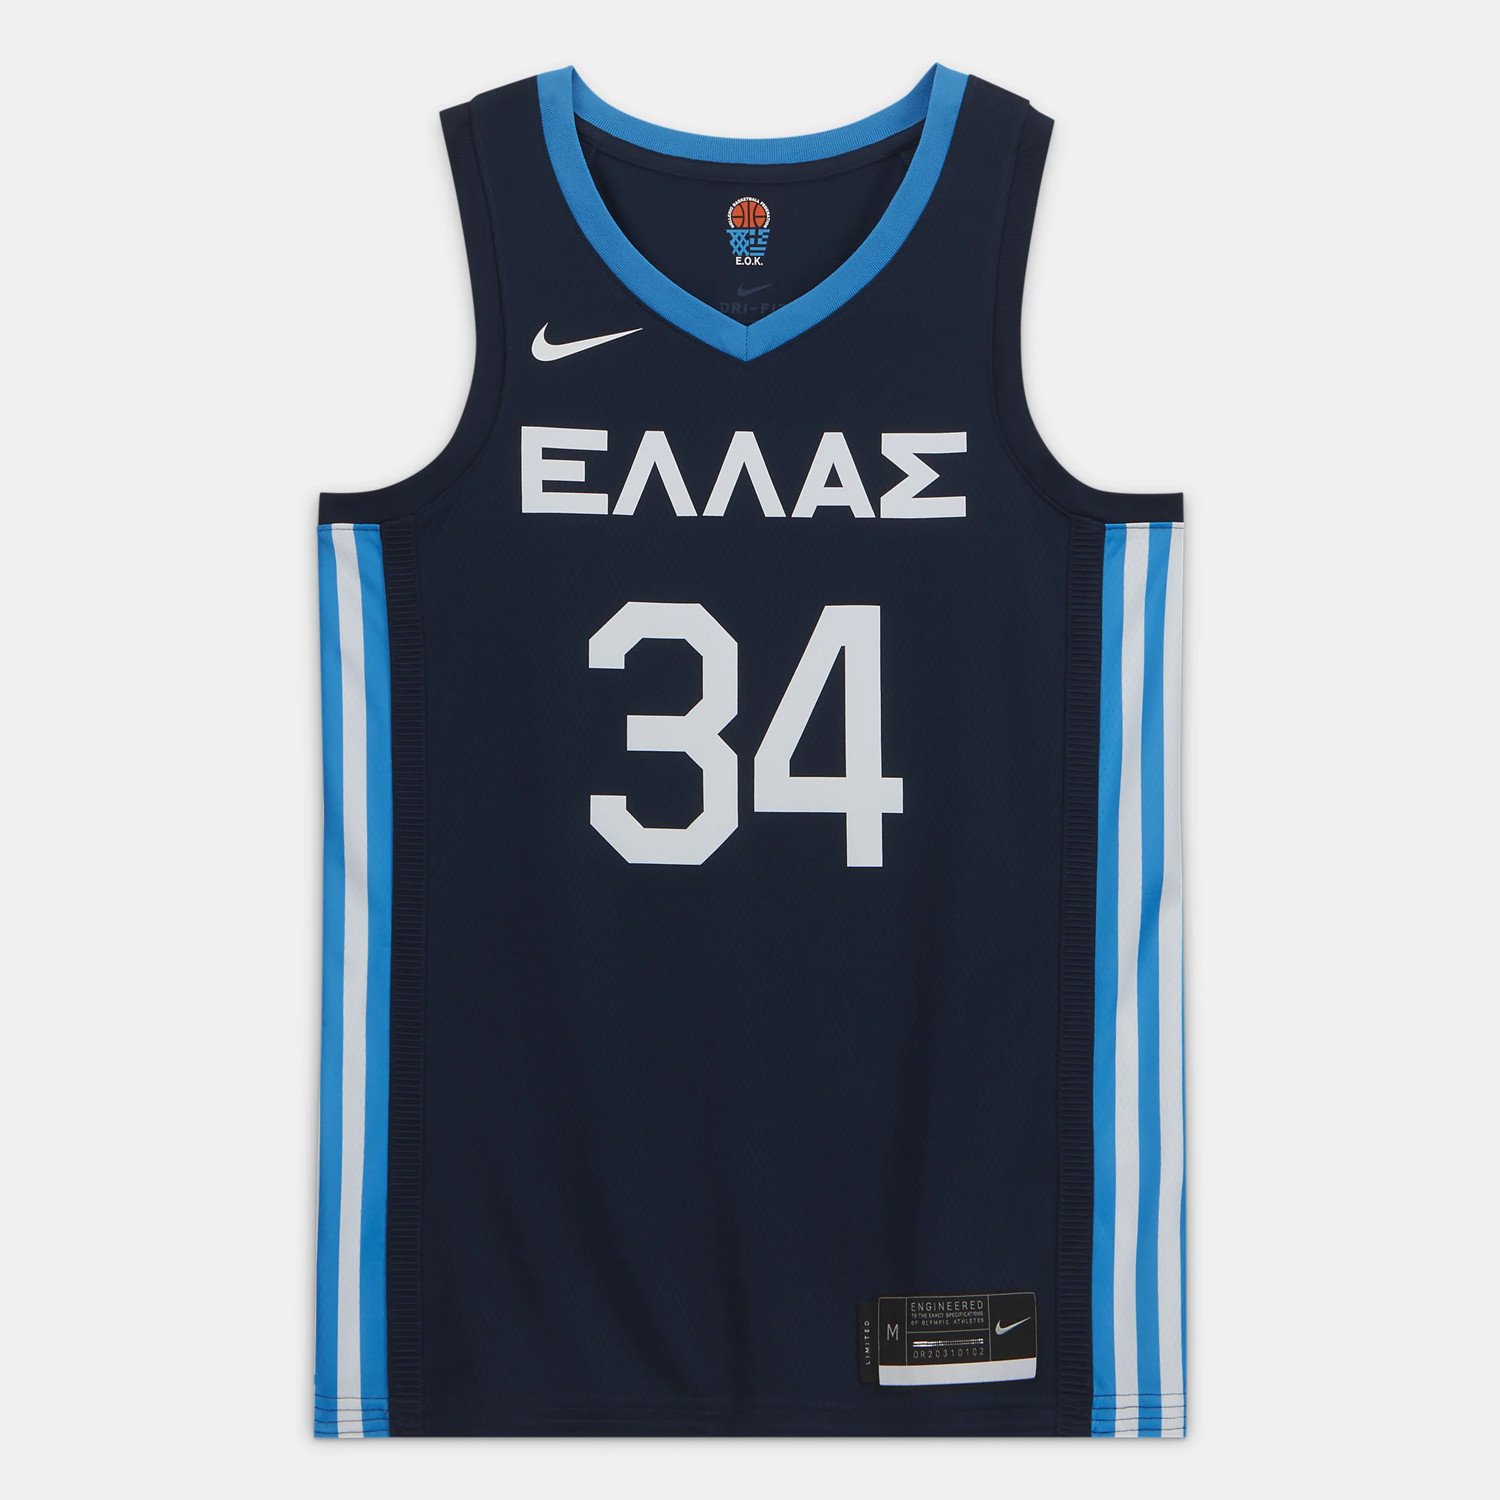 Nike Greece Giannis Antetokounmpo 2022 Limited Edition Road Men's Basketball Jersey (9000052959_45567)